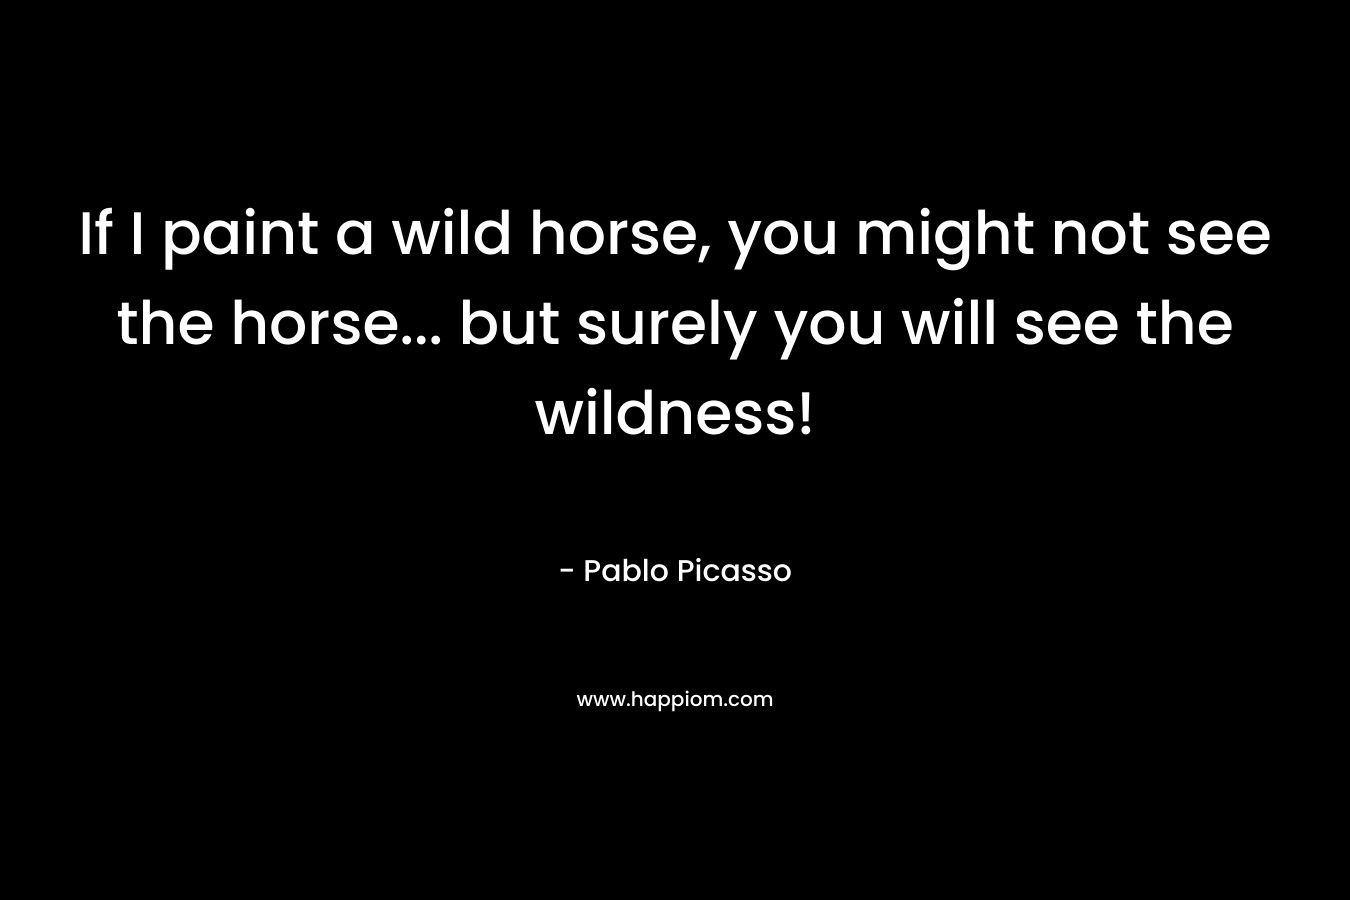 If I paint a wild horse, you might not see the horse… but surely you will see the wildness! – Pablo Picasso